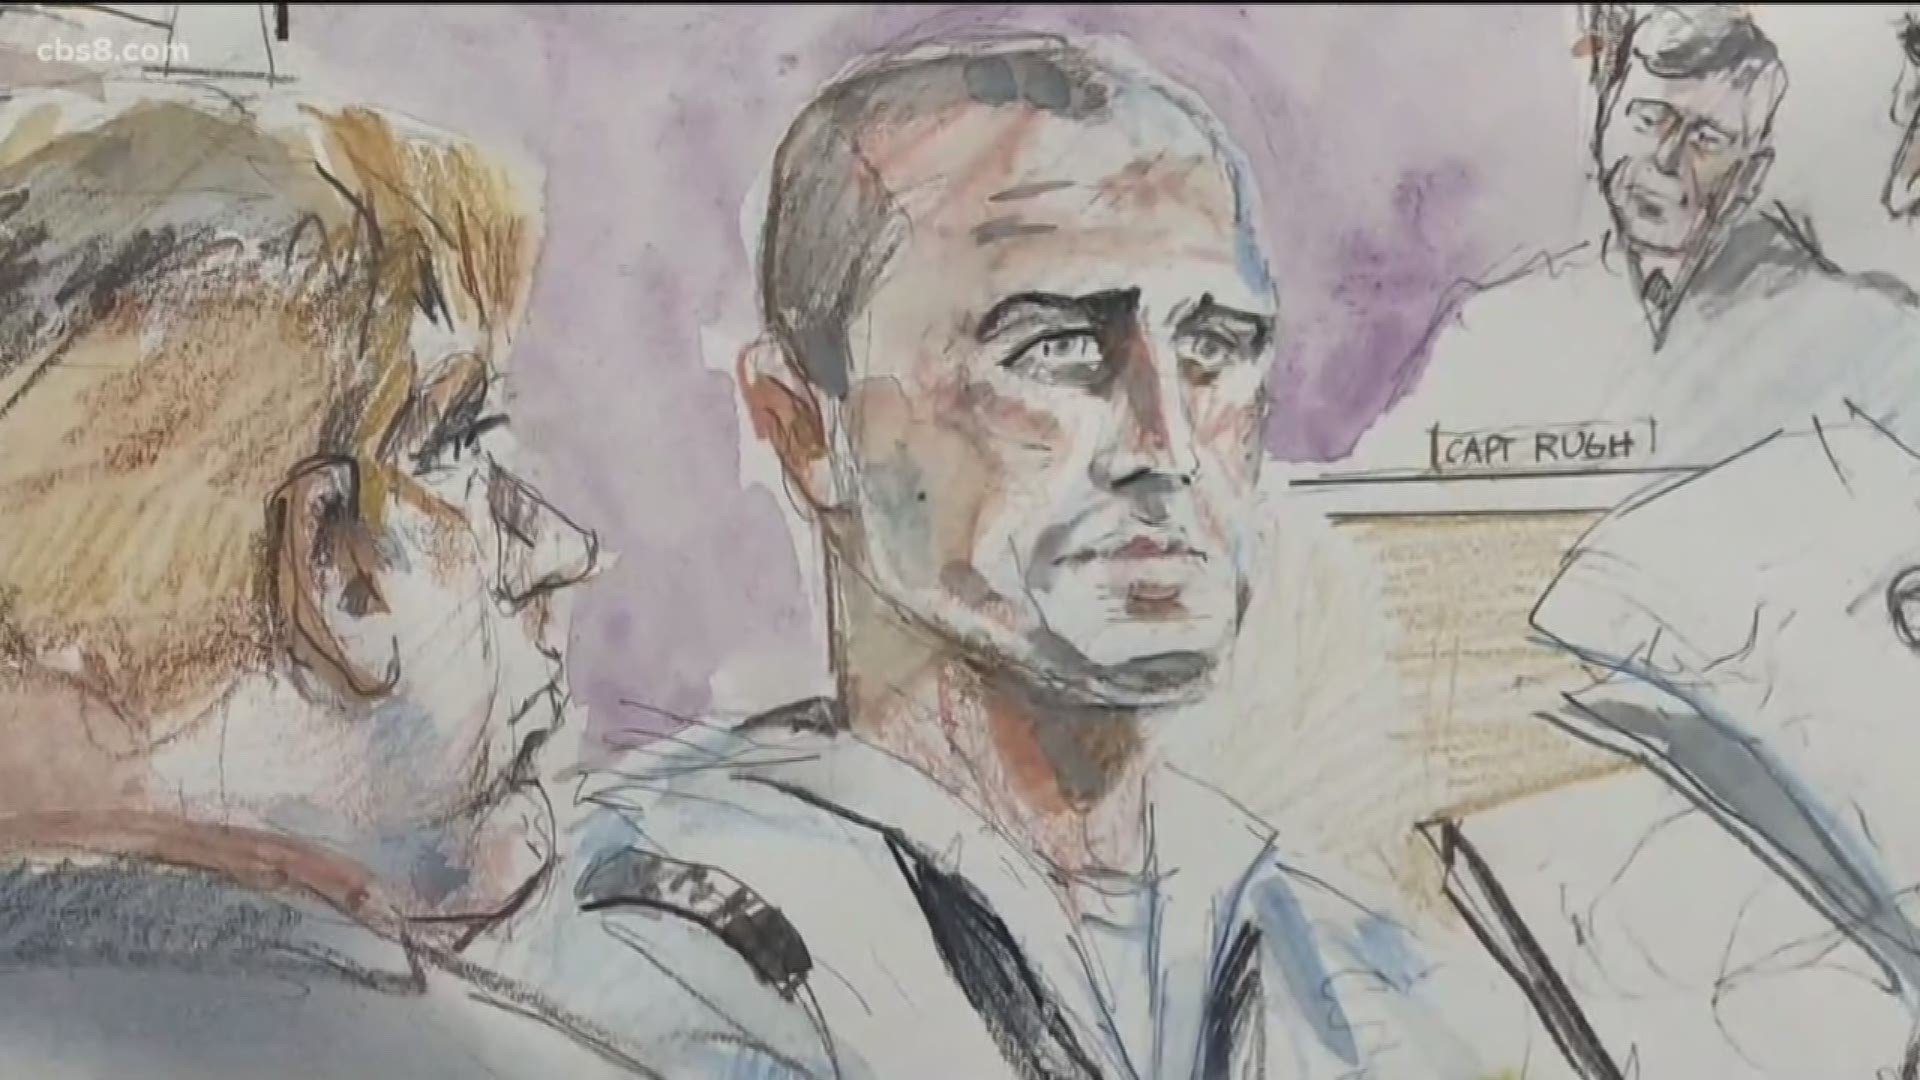 It was a bombshell testimony in court Thursday when a Navy SEAL called by prosecutors to testify at the murder trial of a colleague has acknowledged killing a wounded prisoner in Iraq in what he described as an act of mercy.